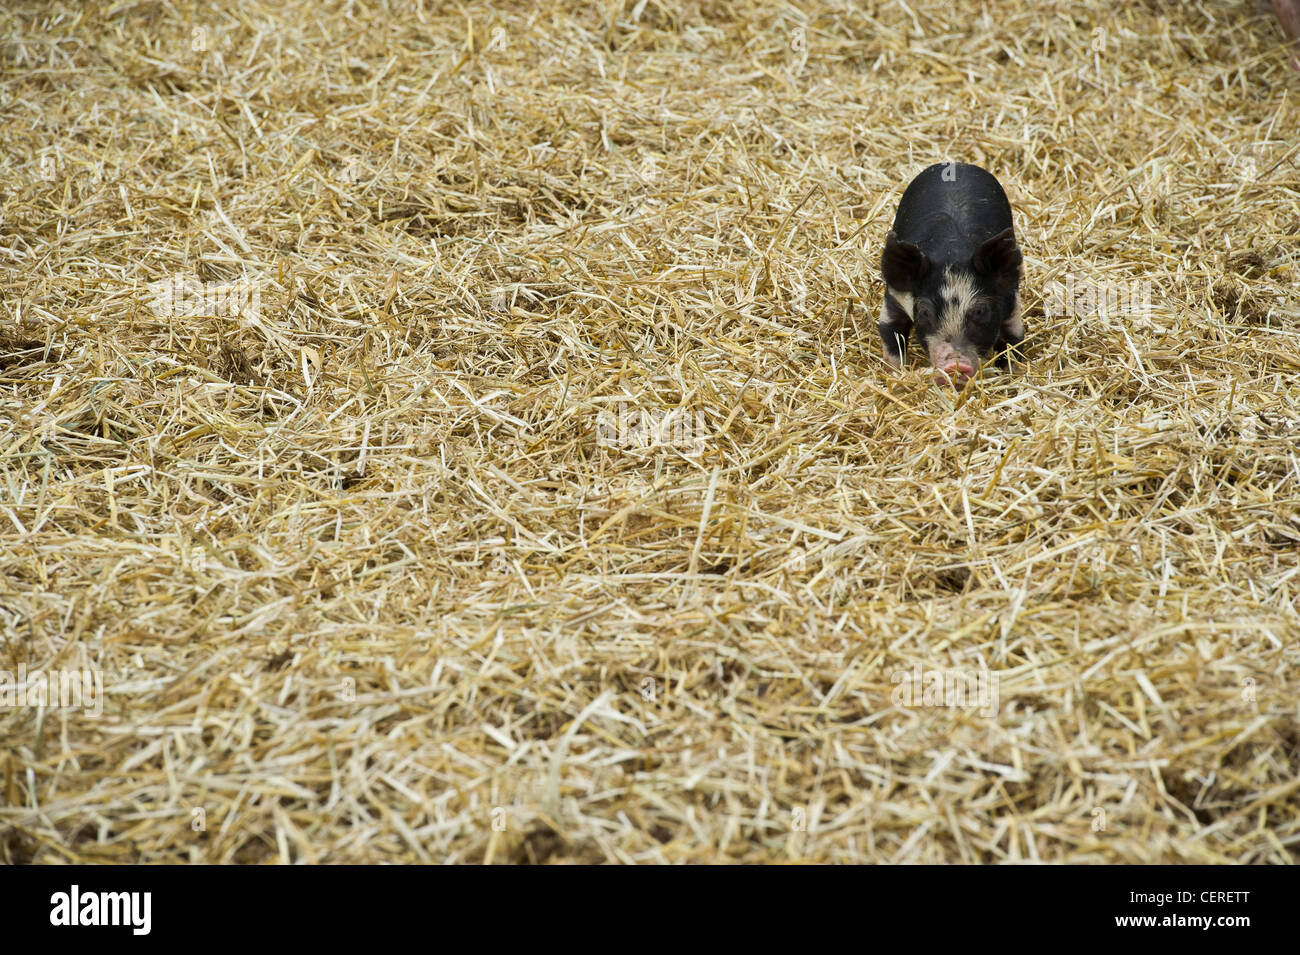 Pig in a pen Stock Photo